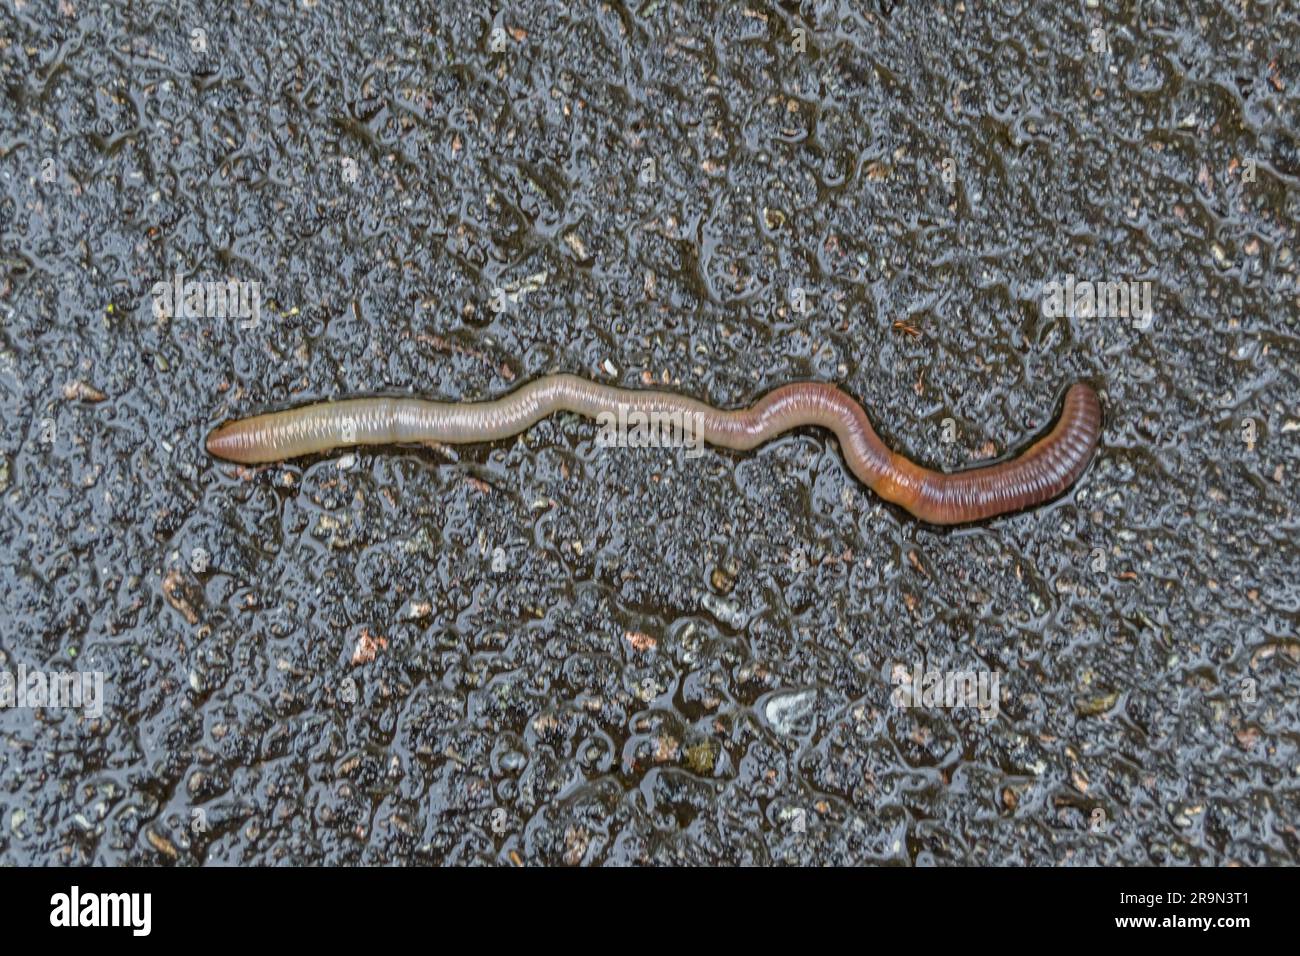 https://c8.alamy.com/comp/2R9N3T1/red-earthworm-it-live-bait-for-fishing-isolated-on-dark-background-photography-consisting-of-striped-gaunt-earthworm-at-asphalt-natural-beauty-from-2R9N3T1.jpg